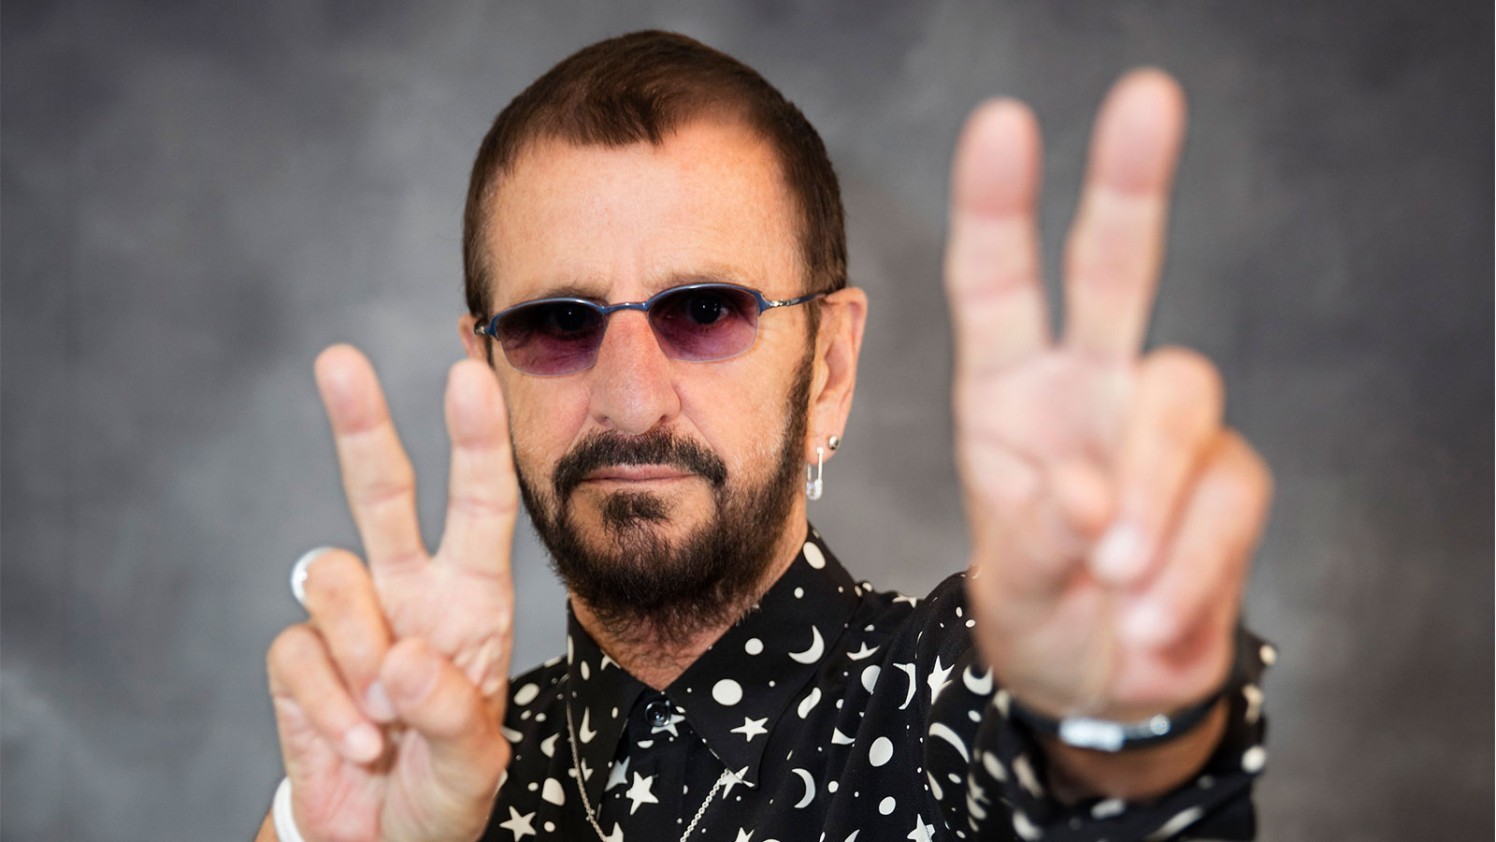 Ringo was naturally left-handed, but played on a right-handed drum set. His grandmother helped him become ambidextrous by teaching him how to write with his right hand as a schoolboy. #PeaceAndLove